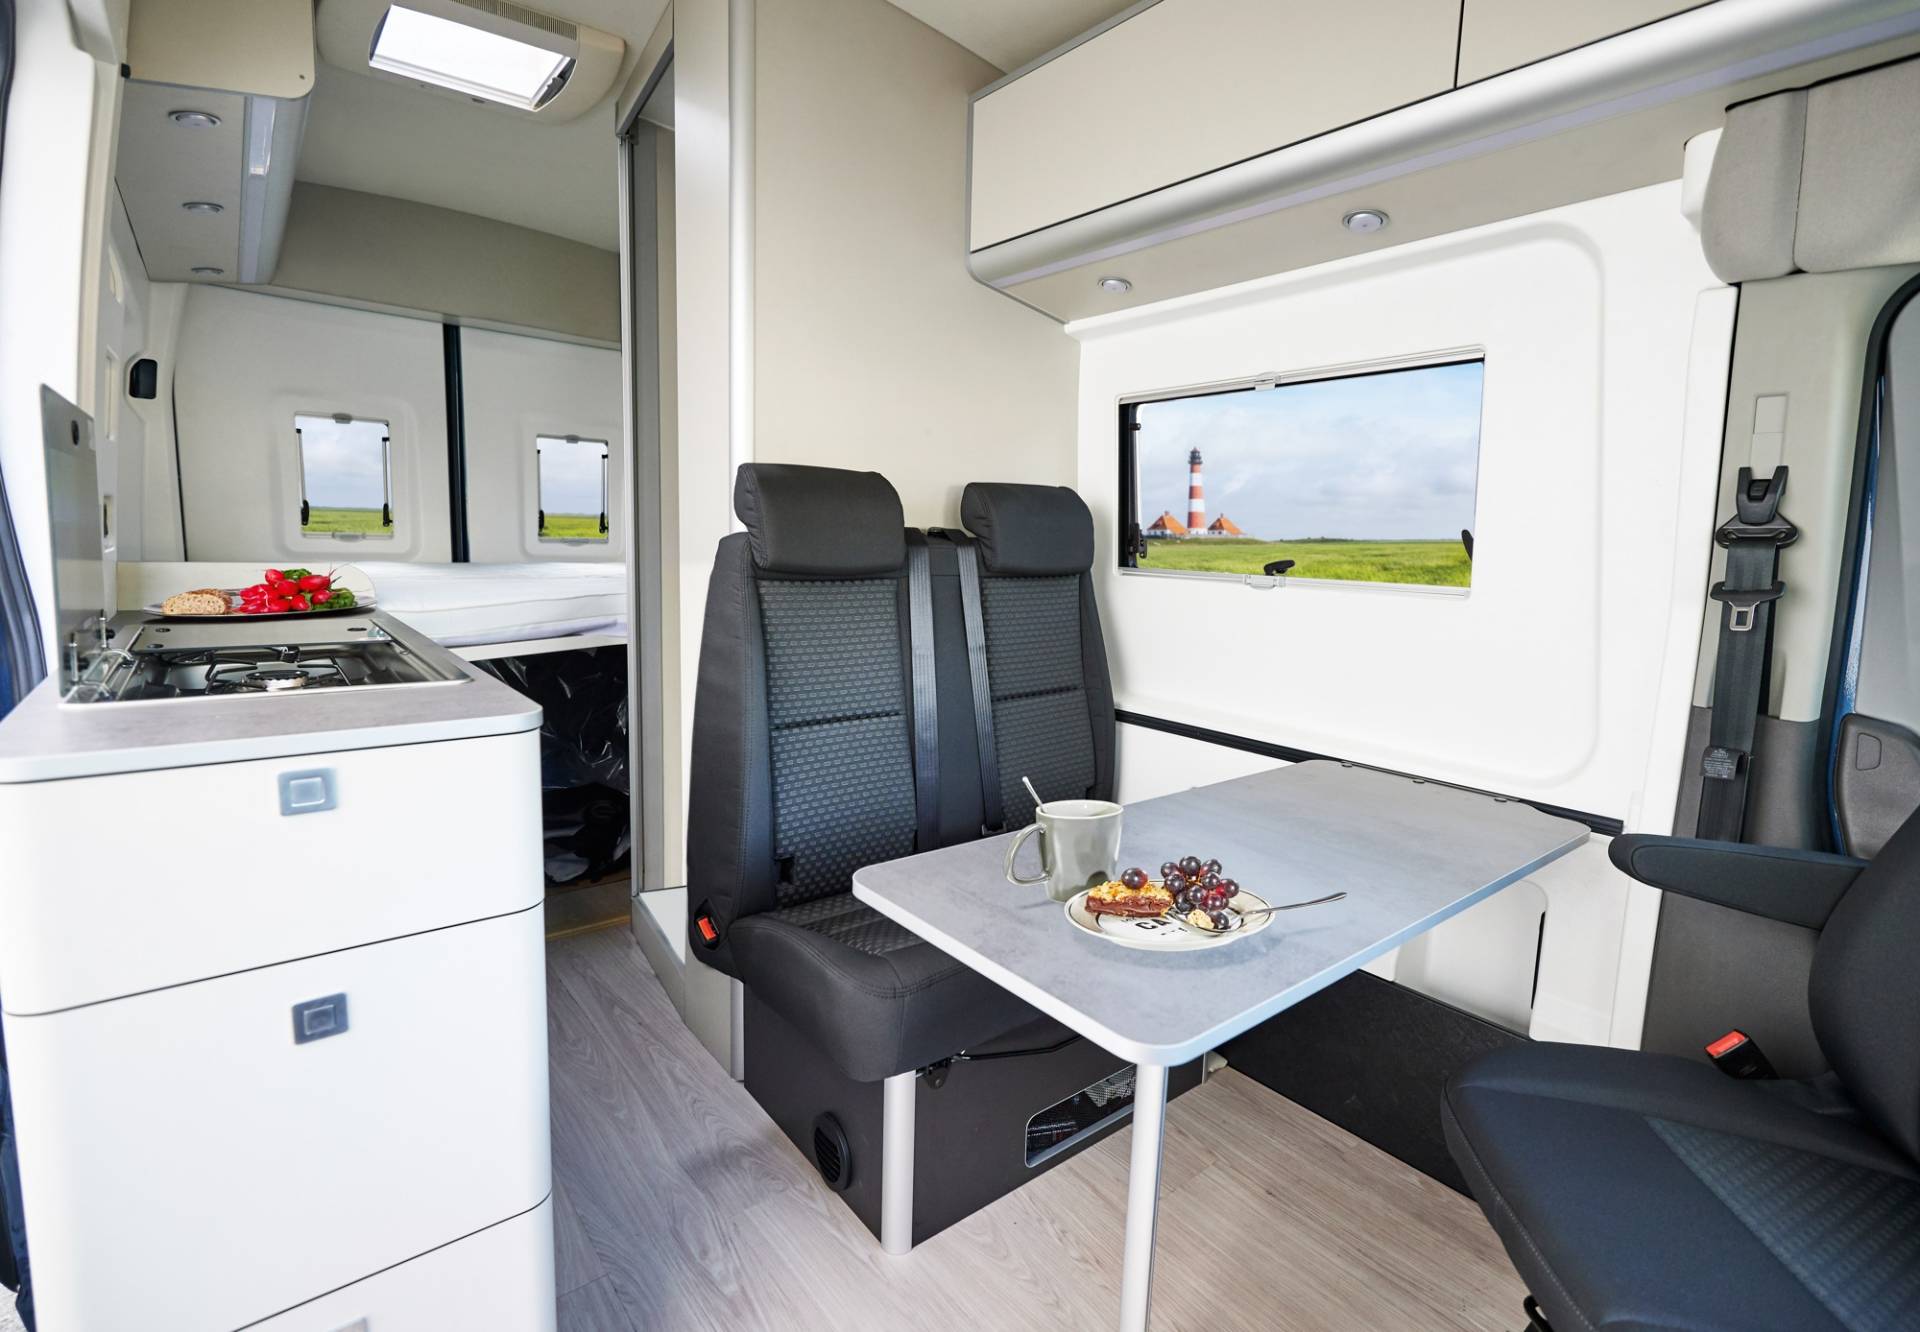 Ford Nugget Camper Van – the Transit you can sleep and shower in